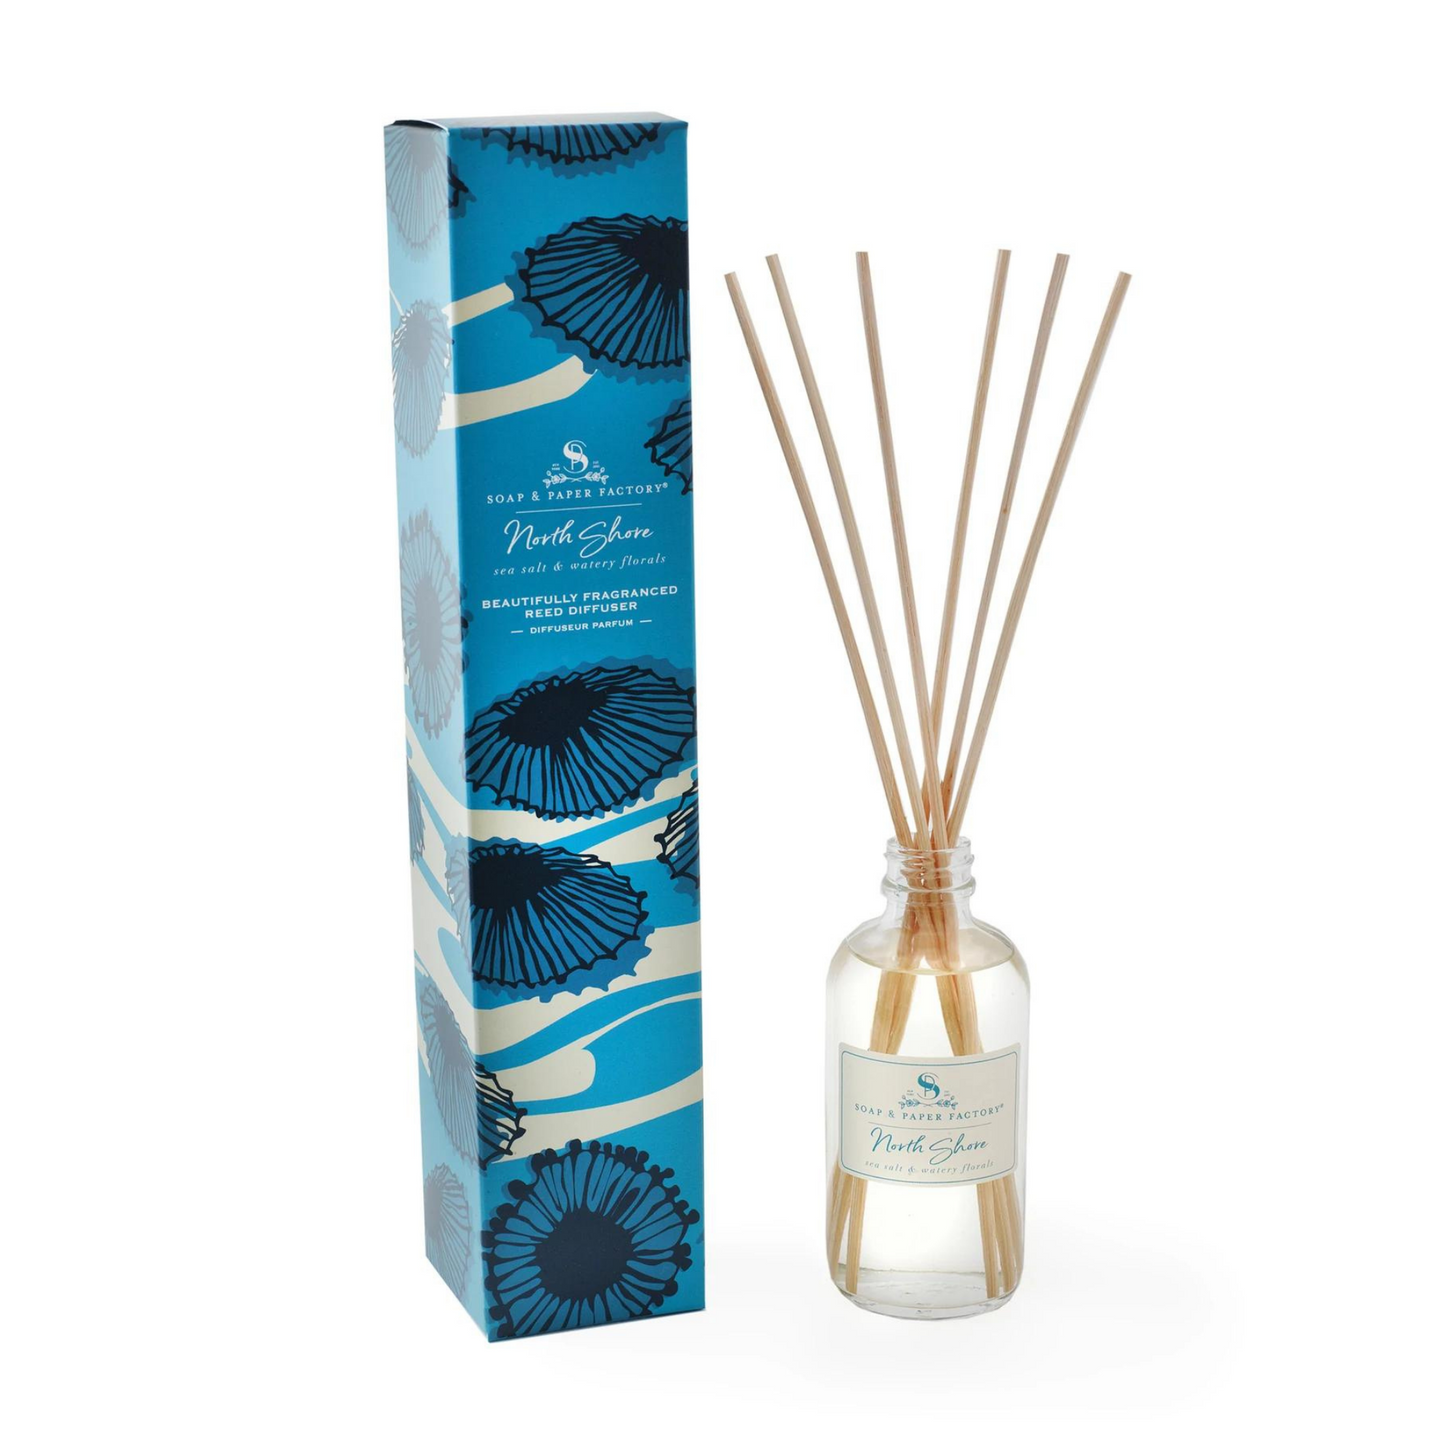 Primary Image of North Shore Reed Diffuser